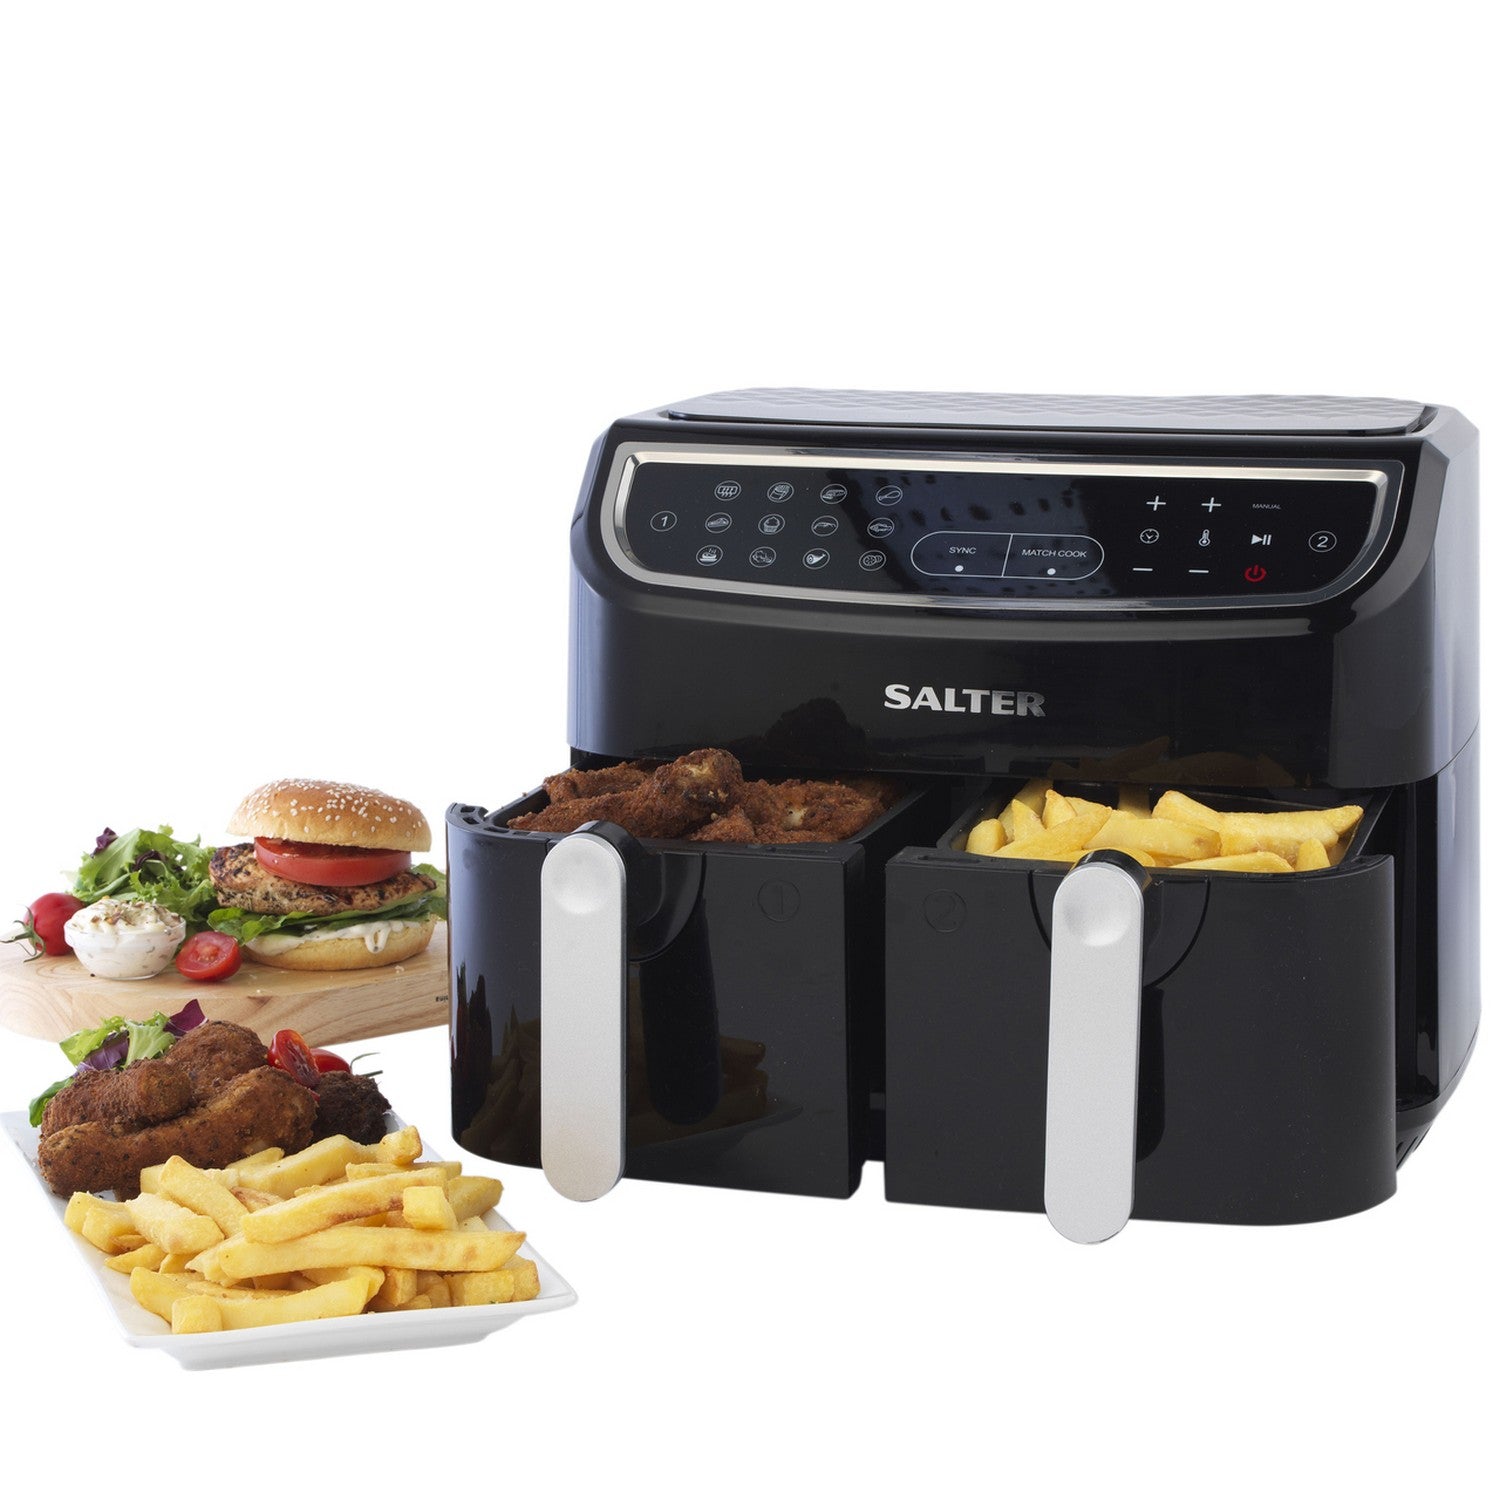 Salter Dual Cook Pro 9L Air Fryer With 12 Cooking Functions